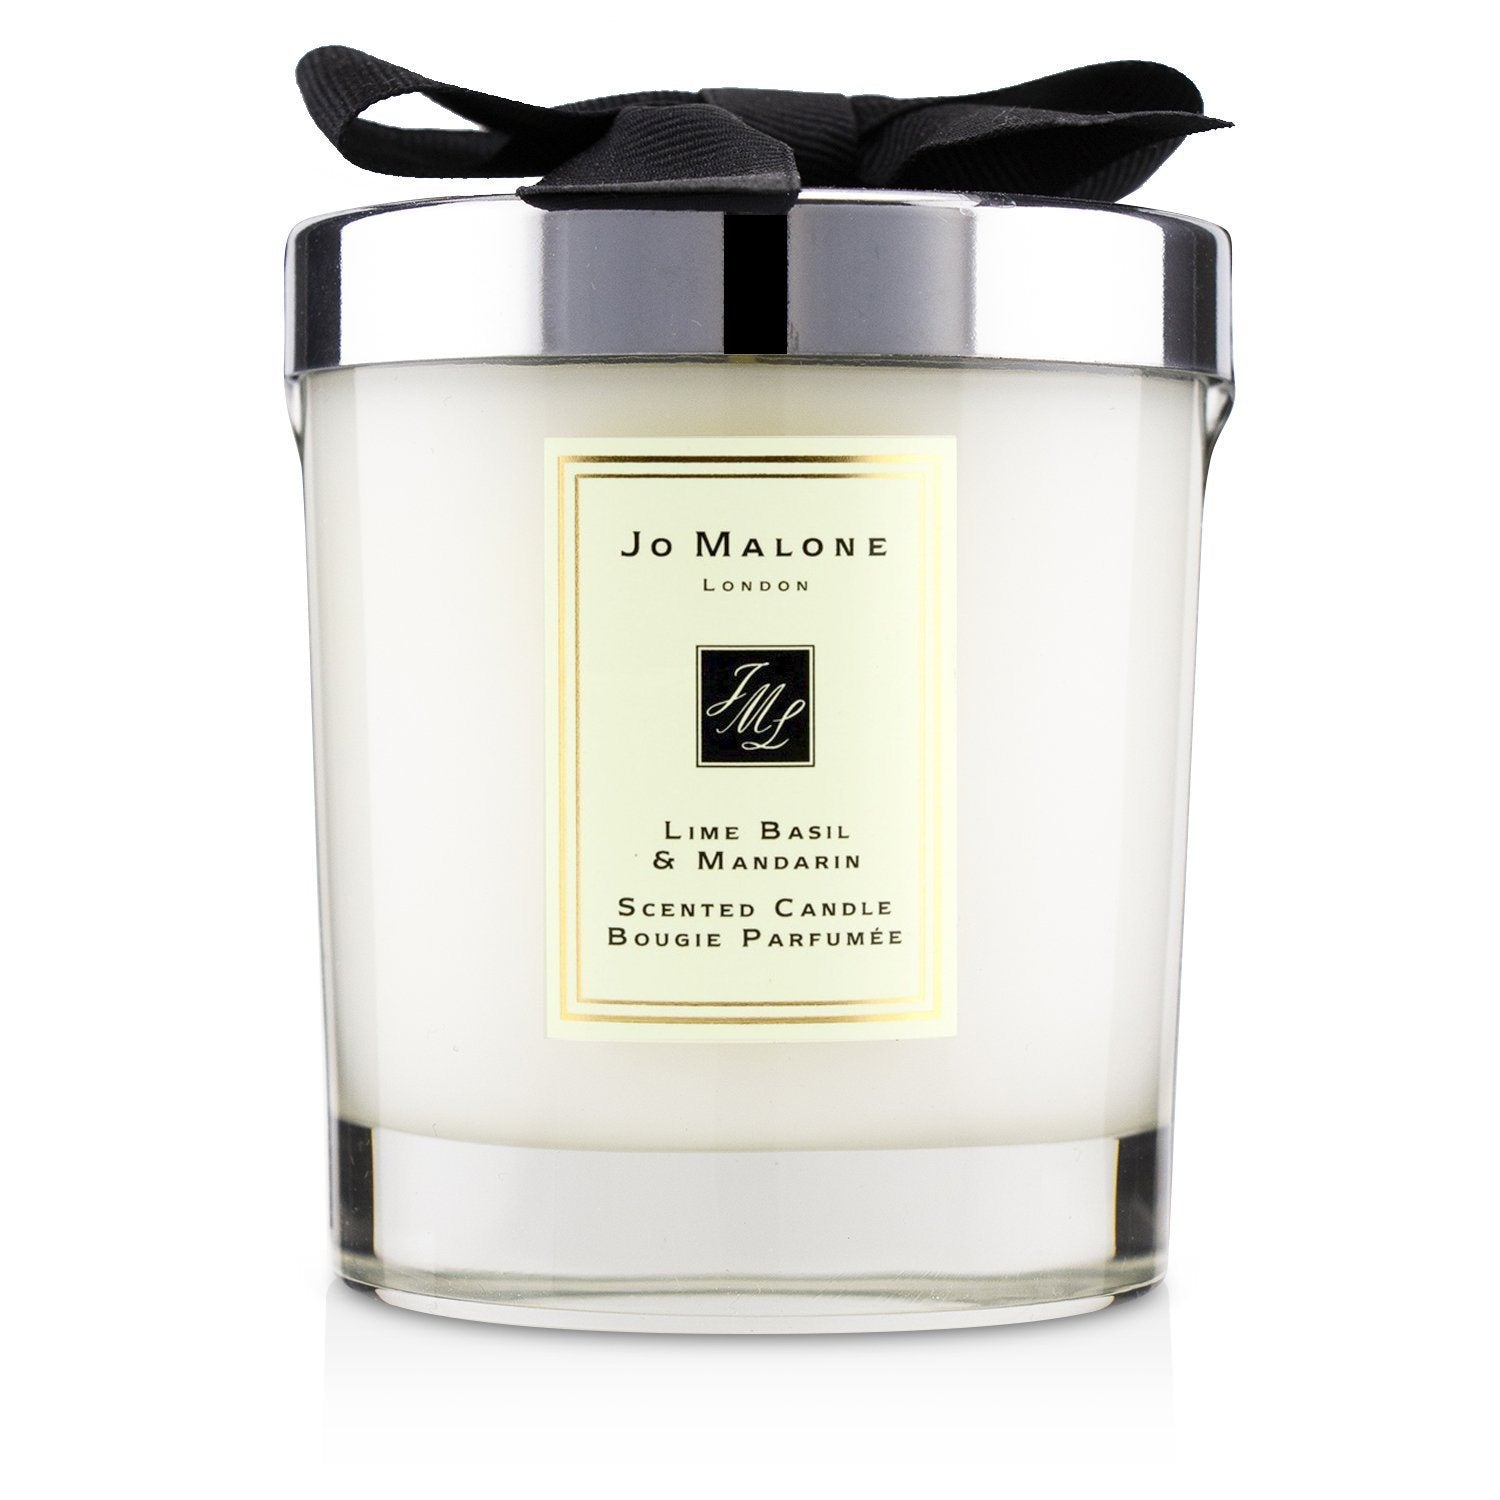 JO MALONE - Lime Basil & Mandarin Scented Candle - 200g (2.5 inch) 3P's Inclusive Beauty